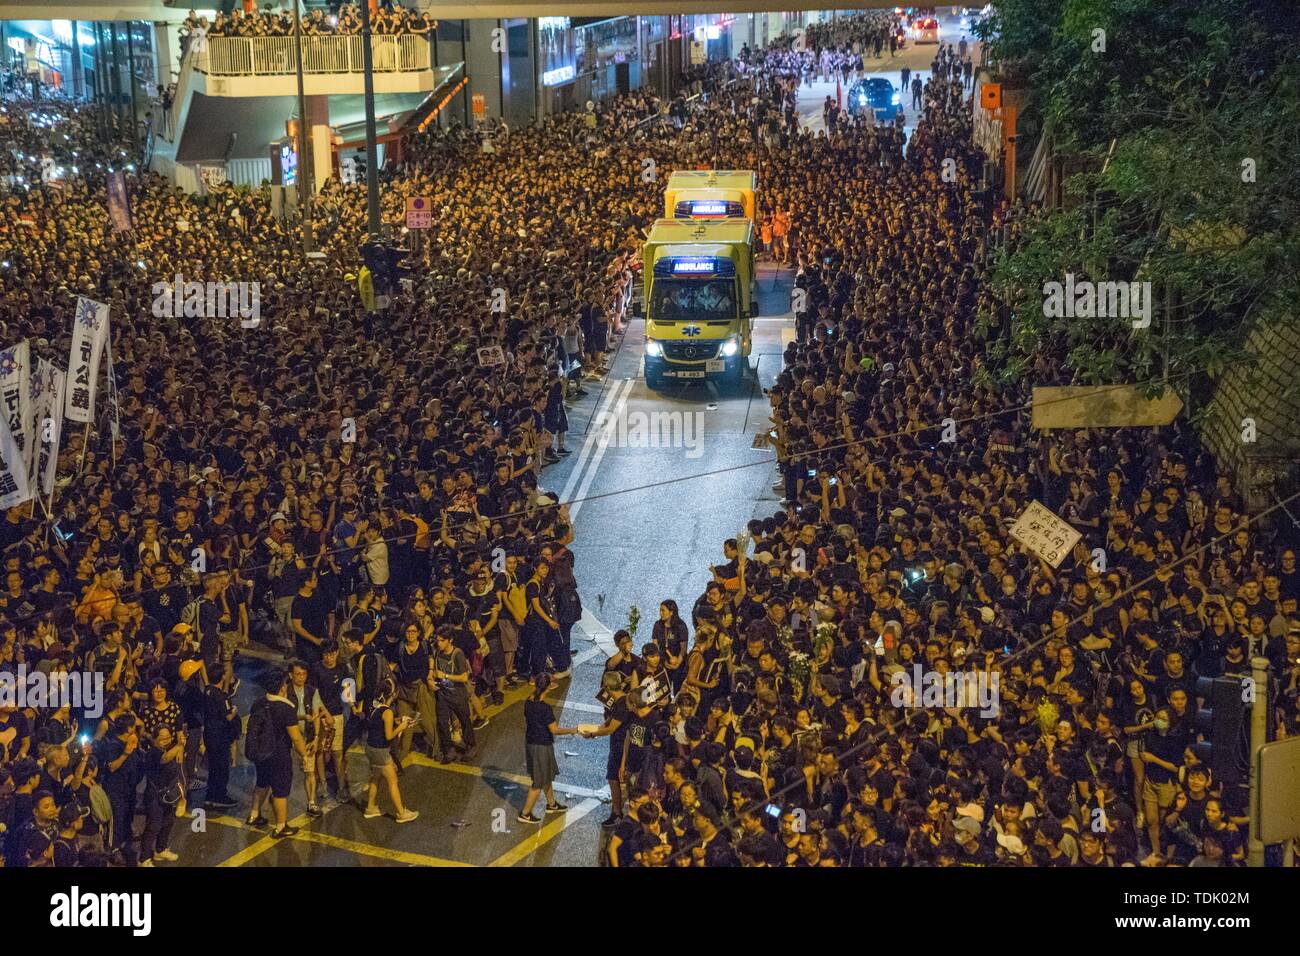 Protesters made way for an ambulance when they marched through the streets of Hong Kong during the mass rally, which called for, among other demands, the withdrawal of the controversial extradition bill and the resignation of Chief Executive Carrie Lam. Despite the Chief Executive Carrie Lam's attempt to ease the heightened tension by agreeing to suspend the controversial bill, close to 2 million people participated in Sunday's rally, according to the organizers. The protesters called for the withdrawal of the controversial extradition bill, the release and non-prosecution of the people arrest Stock Photo